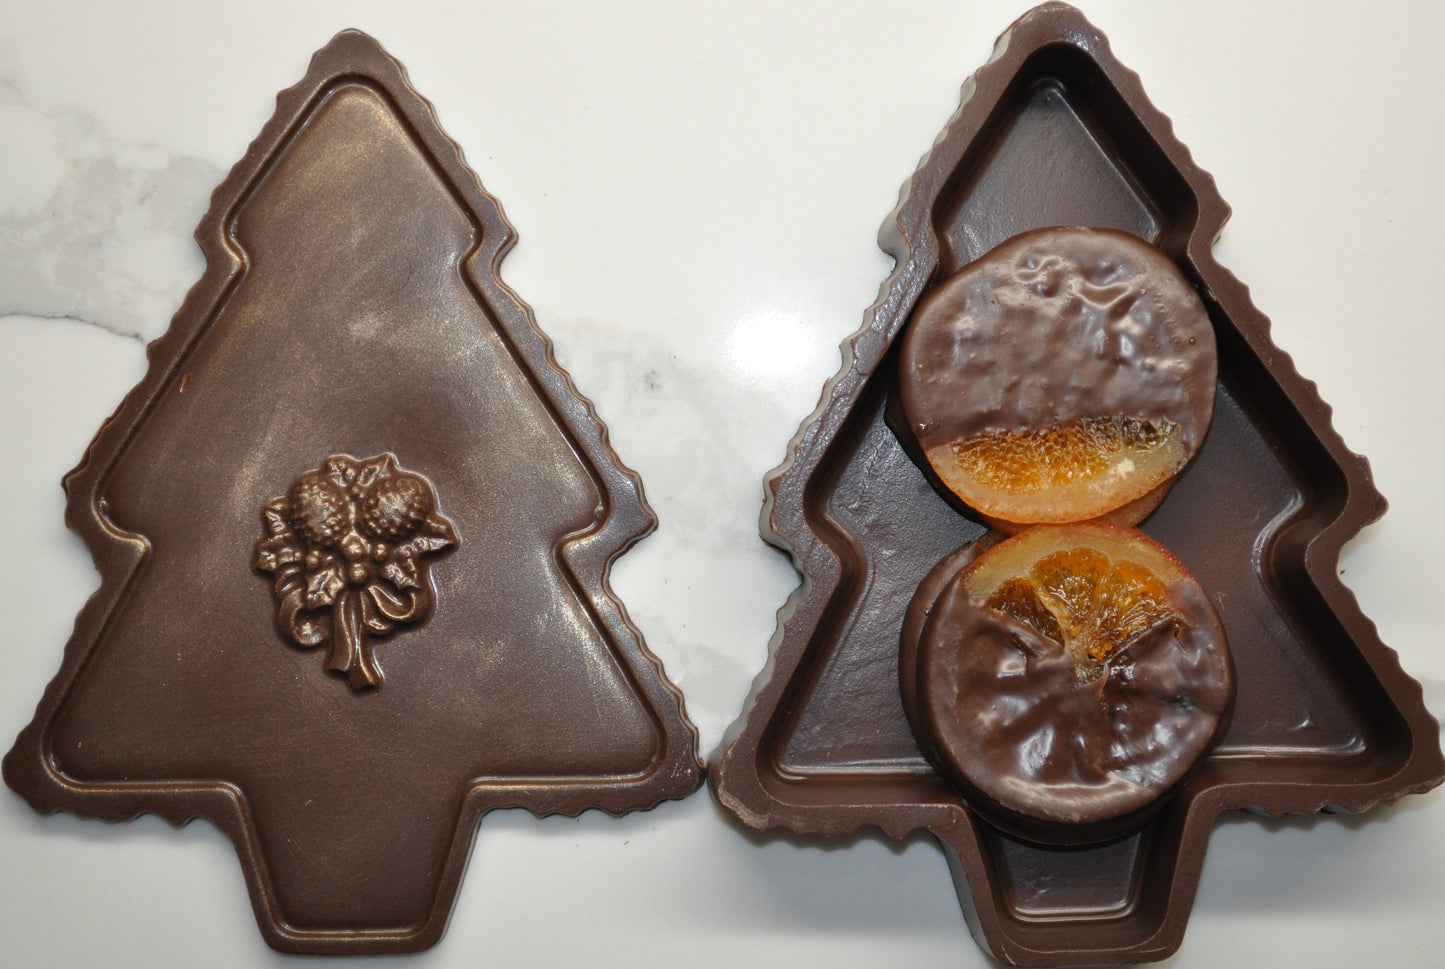 Large Christmas Tree shaped Chocolate Gift Box with Candied Orange Slices